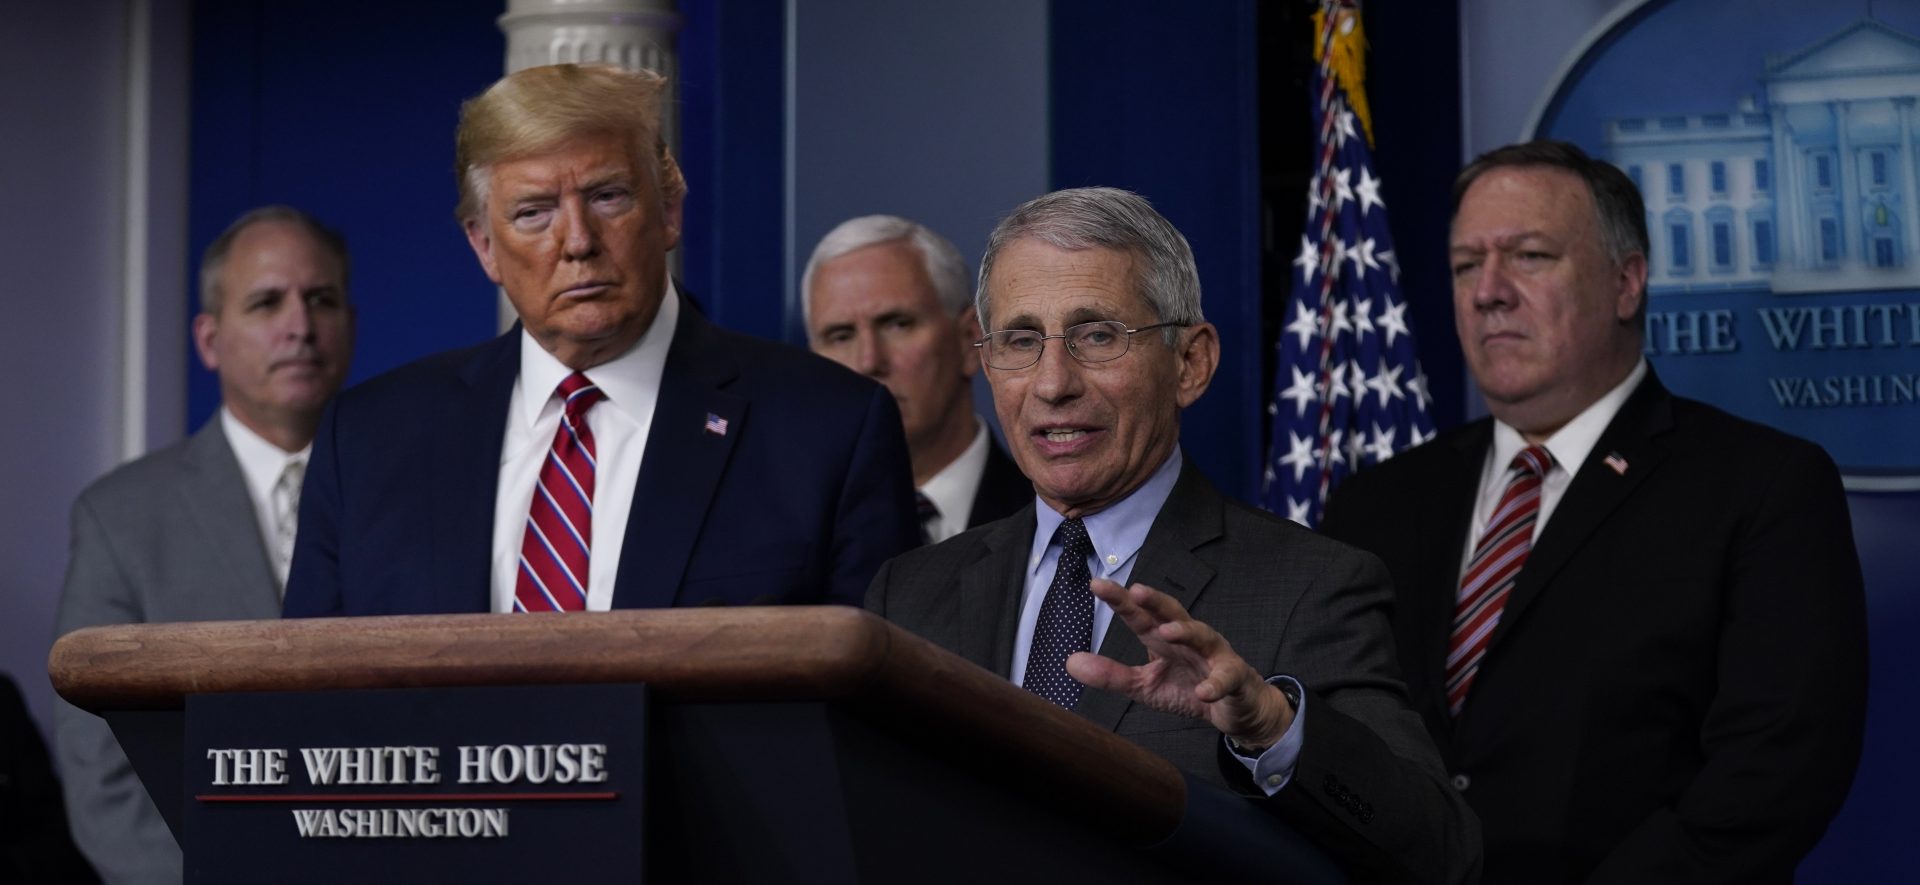 Director of the National Institute of Allergy and Infectious Diseases Dr. Anthony Fauci speaks during a coronavirus task force briefing at the White House, Friday, March 20, 2020, in Washington. 